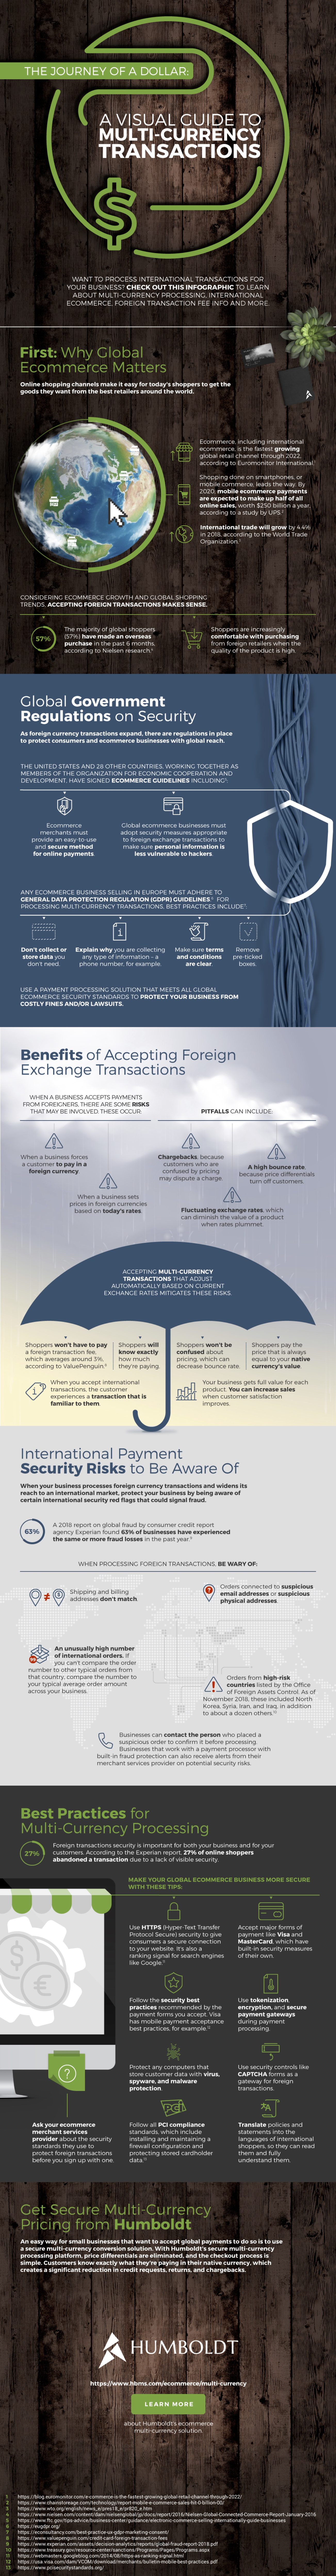 international merchant services and multicurrency transactions infographic